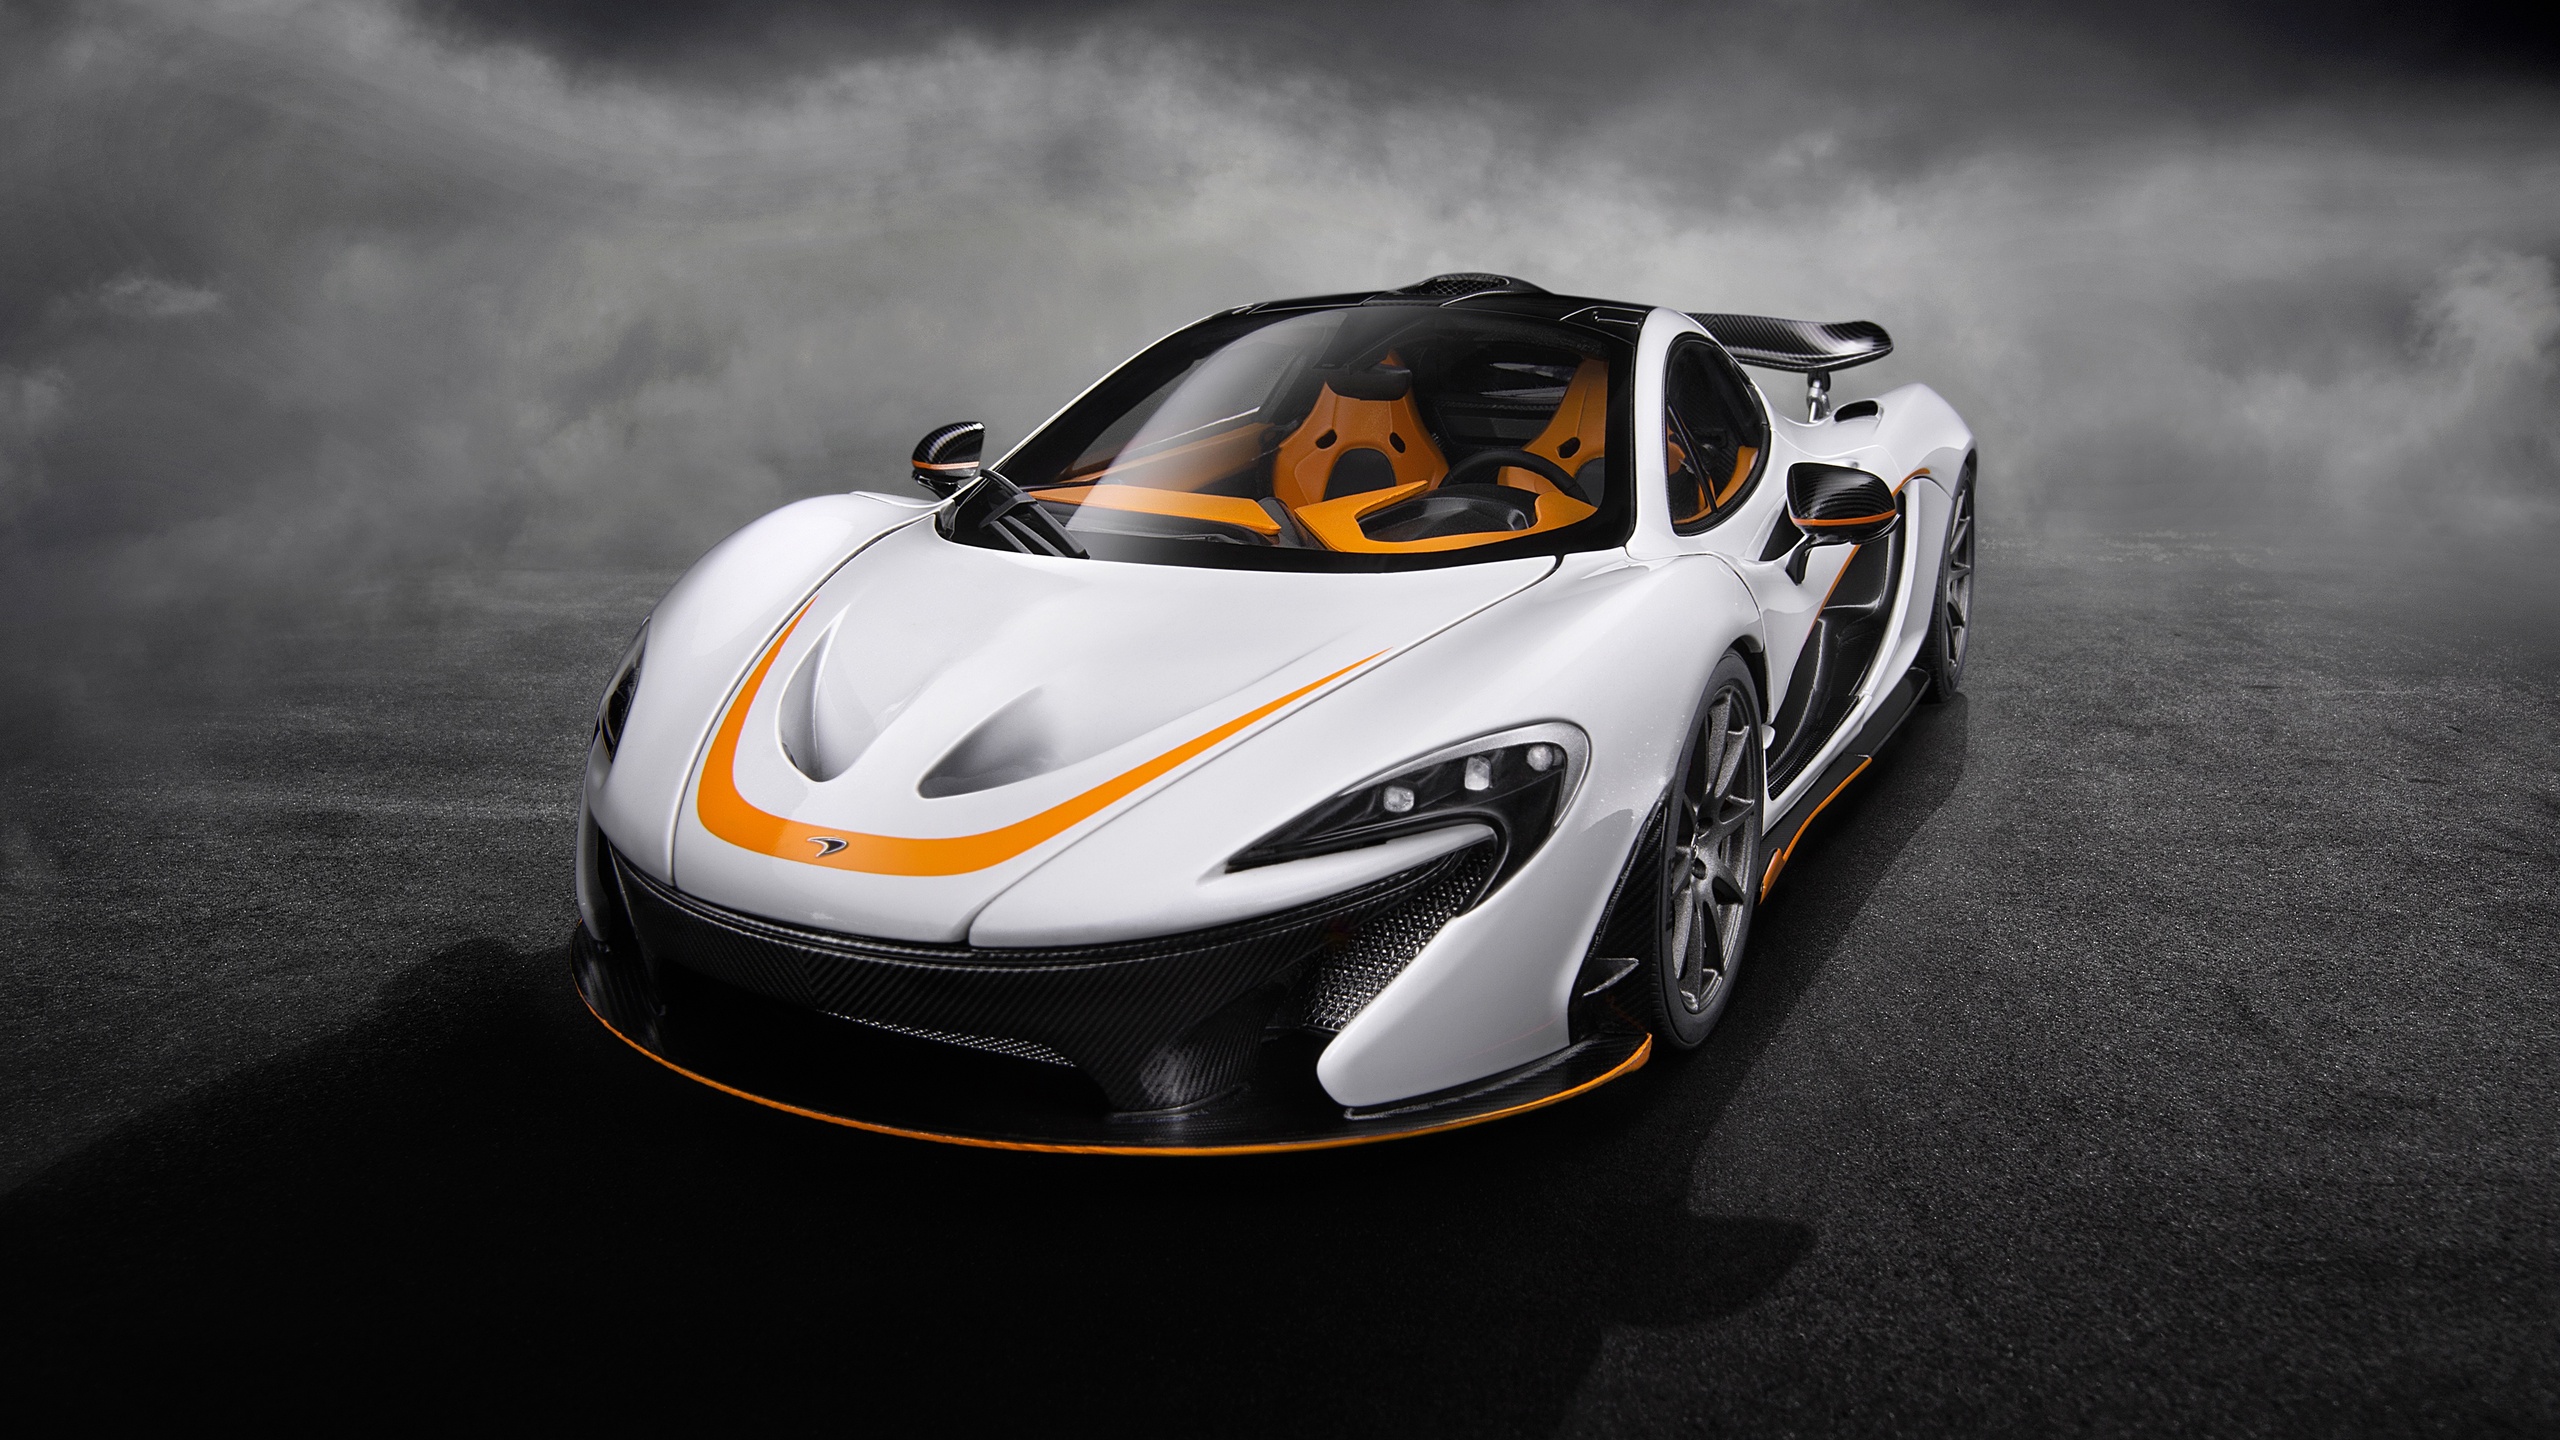 2560x1440 Mclaren P1 4k 1440p Resolution Hd 4k Wallpapers Images Backgrounds Photos And Pictures